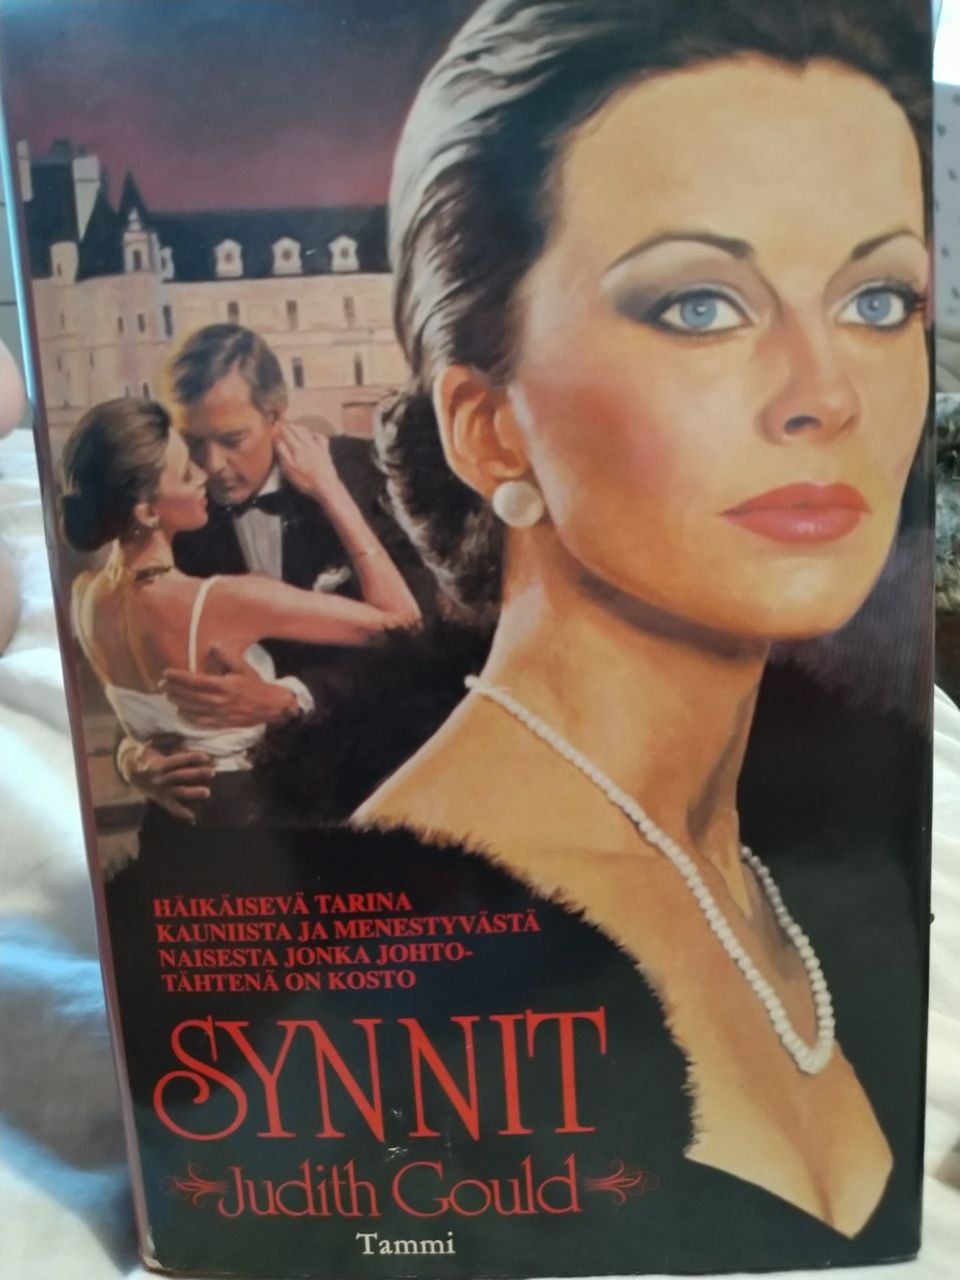 Synnit - Judith Gould